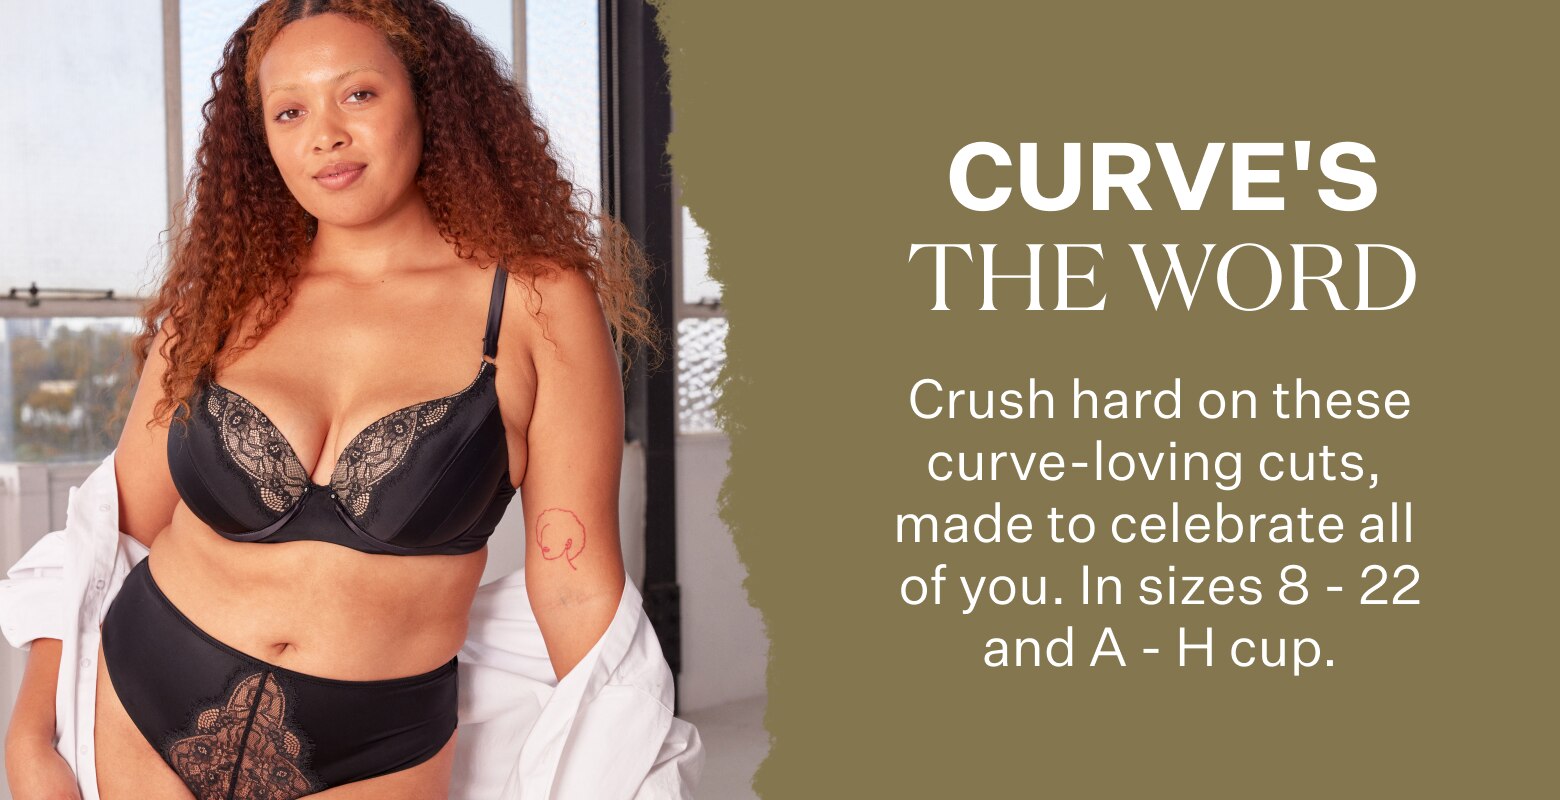 Curve's The Word. Crush hard on these curve-loving cuts, made to celebrate all of you. In sizes 8 - 22 and A - H cup.